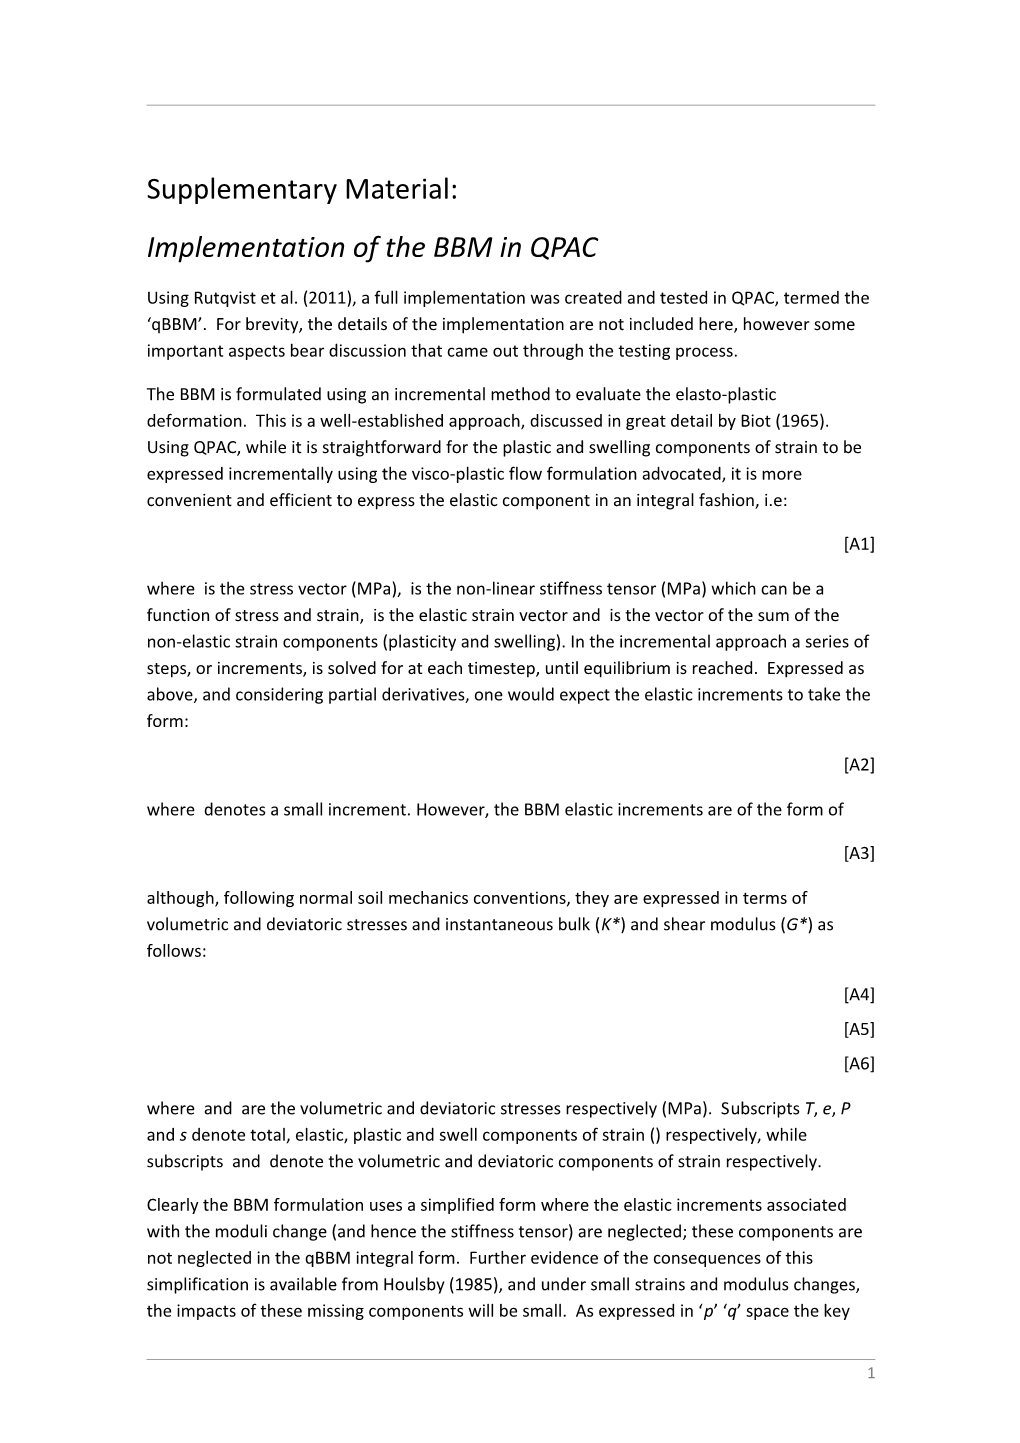 Implementation of the BBM in QPAC